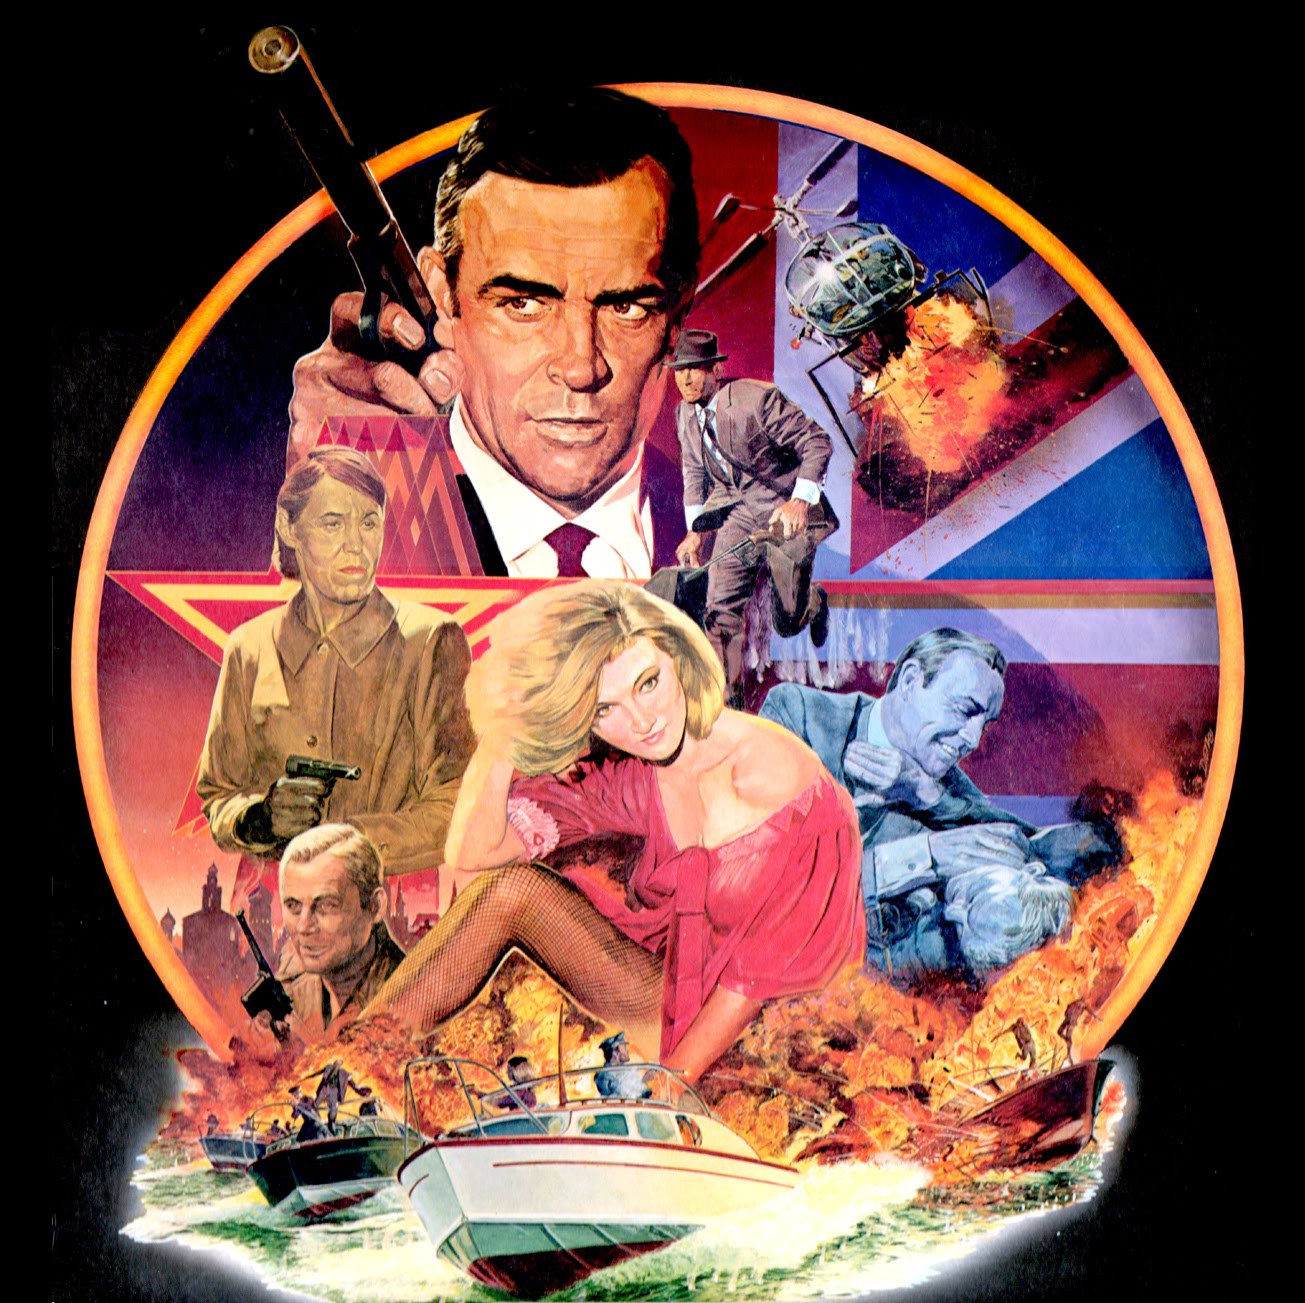 Illustrated 007 - The Art of James Bond: March 2012